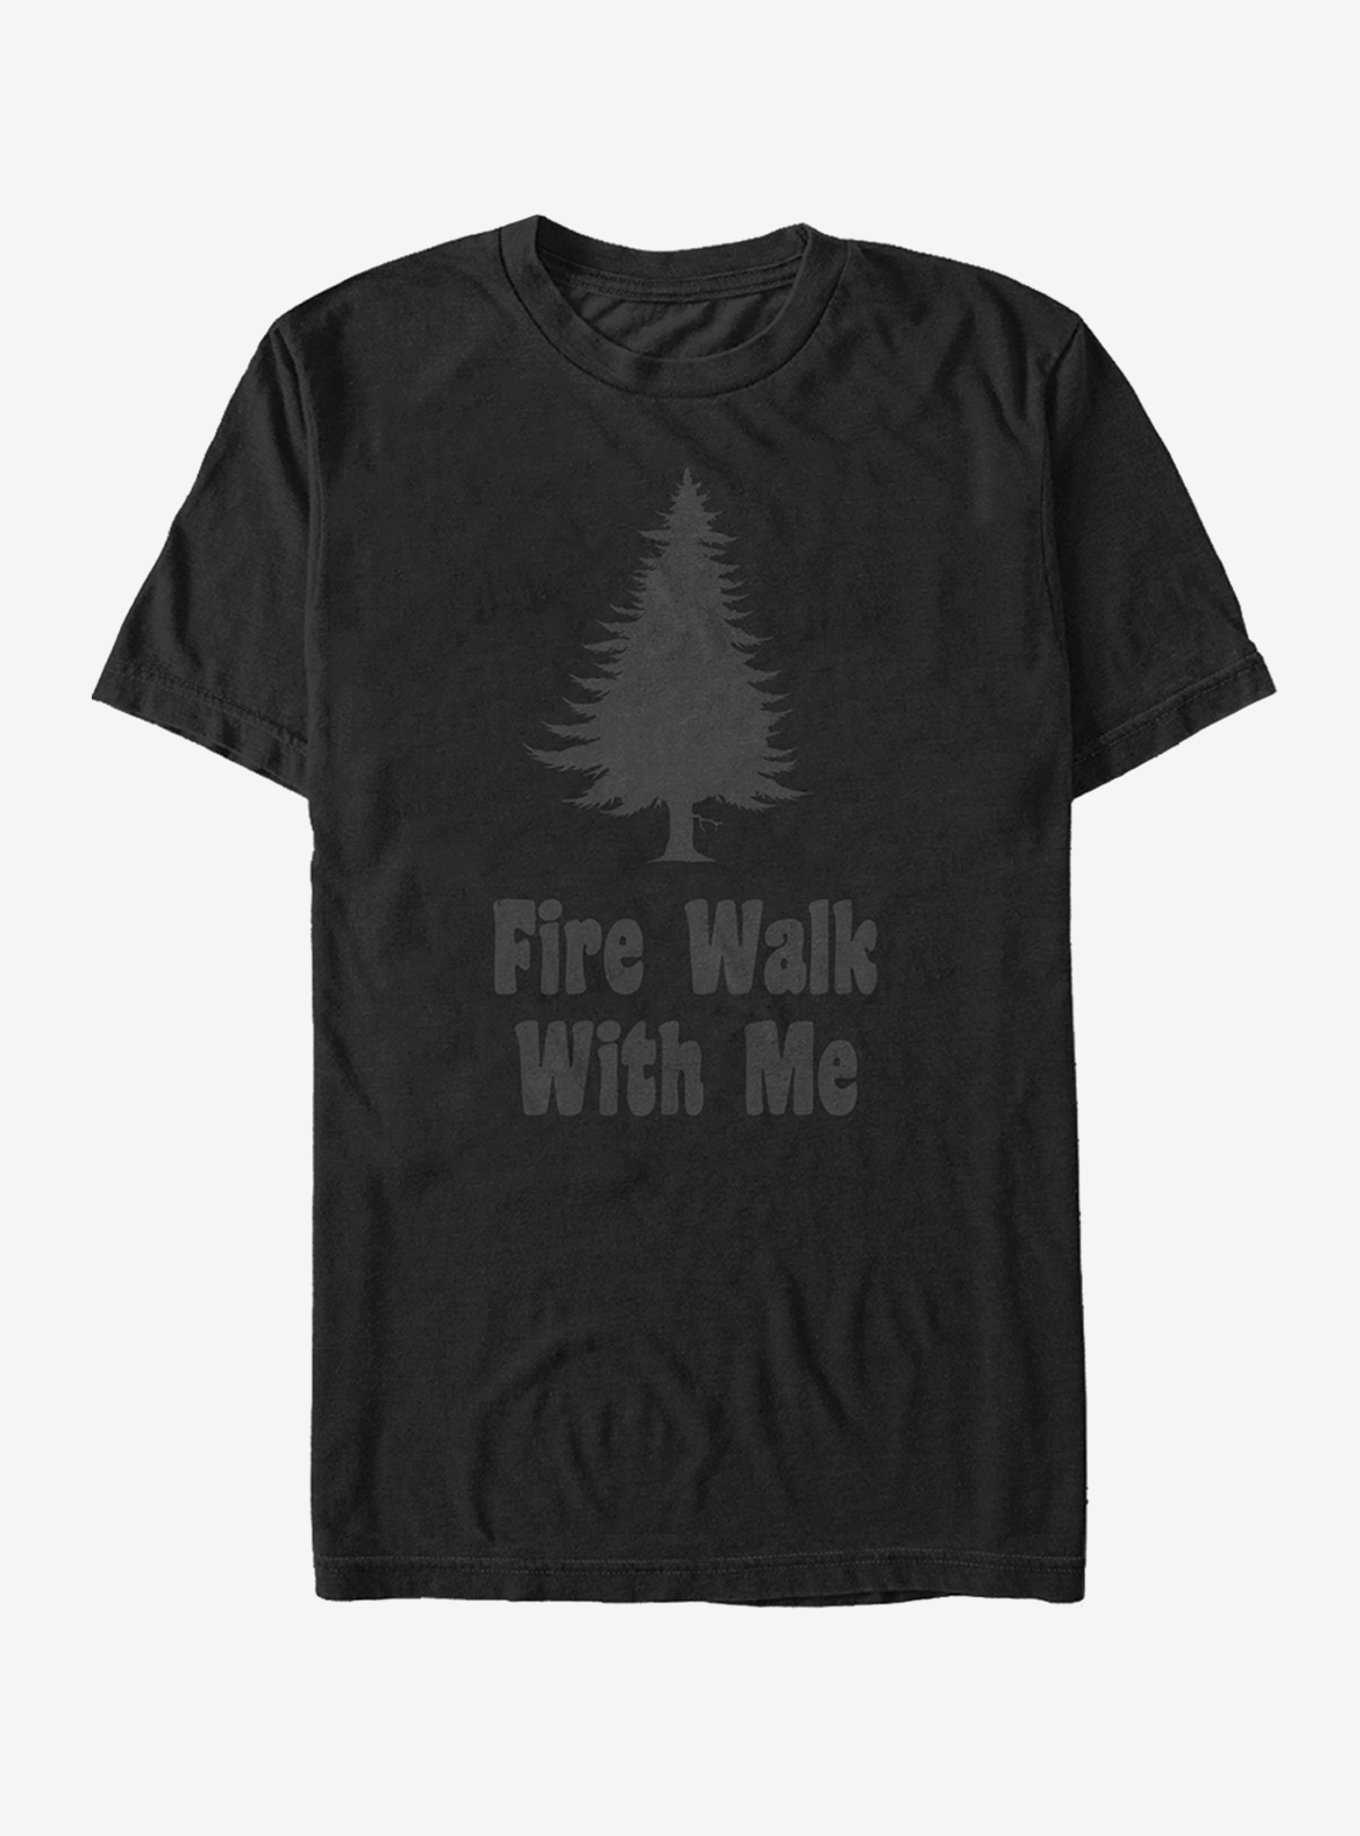 Twin Peaks Fire Walk With Me T-Shirt, , hi-res